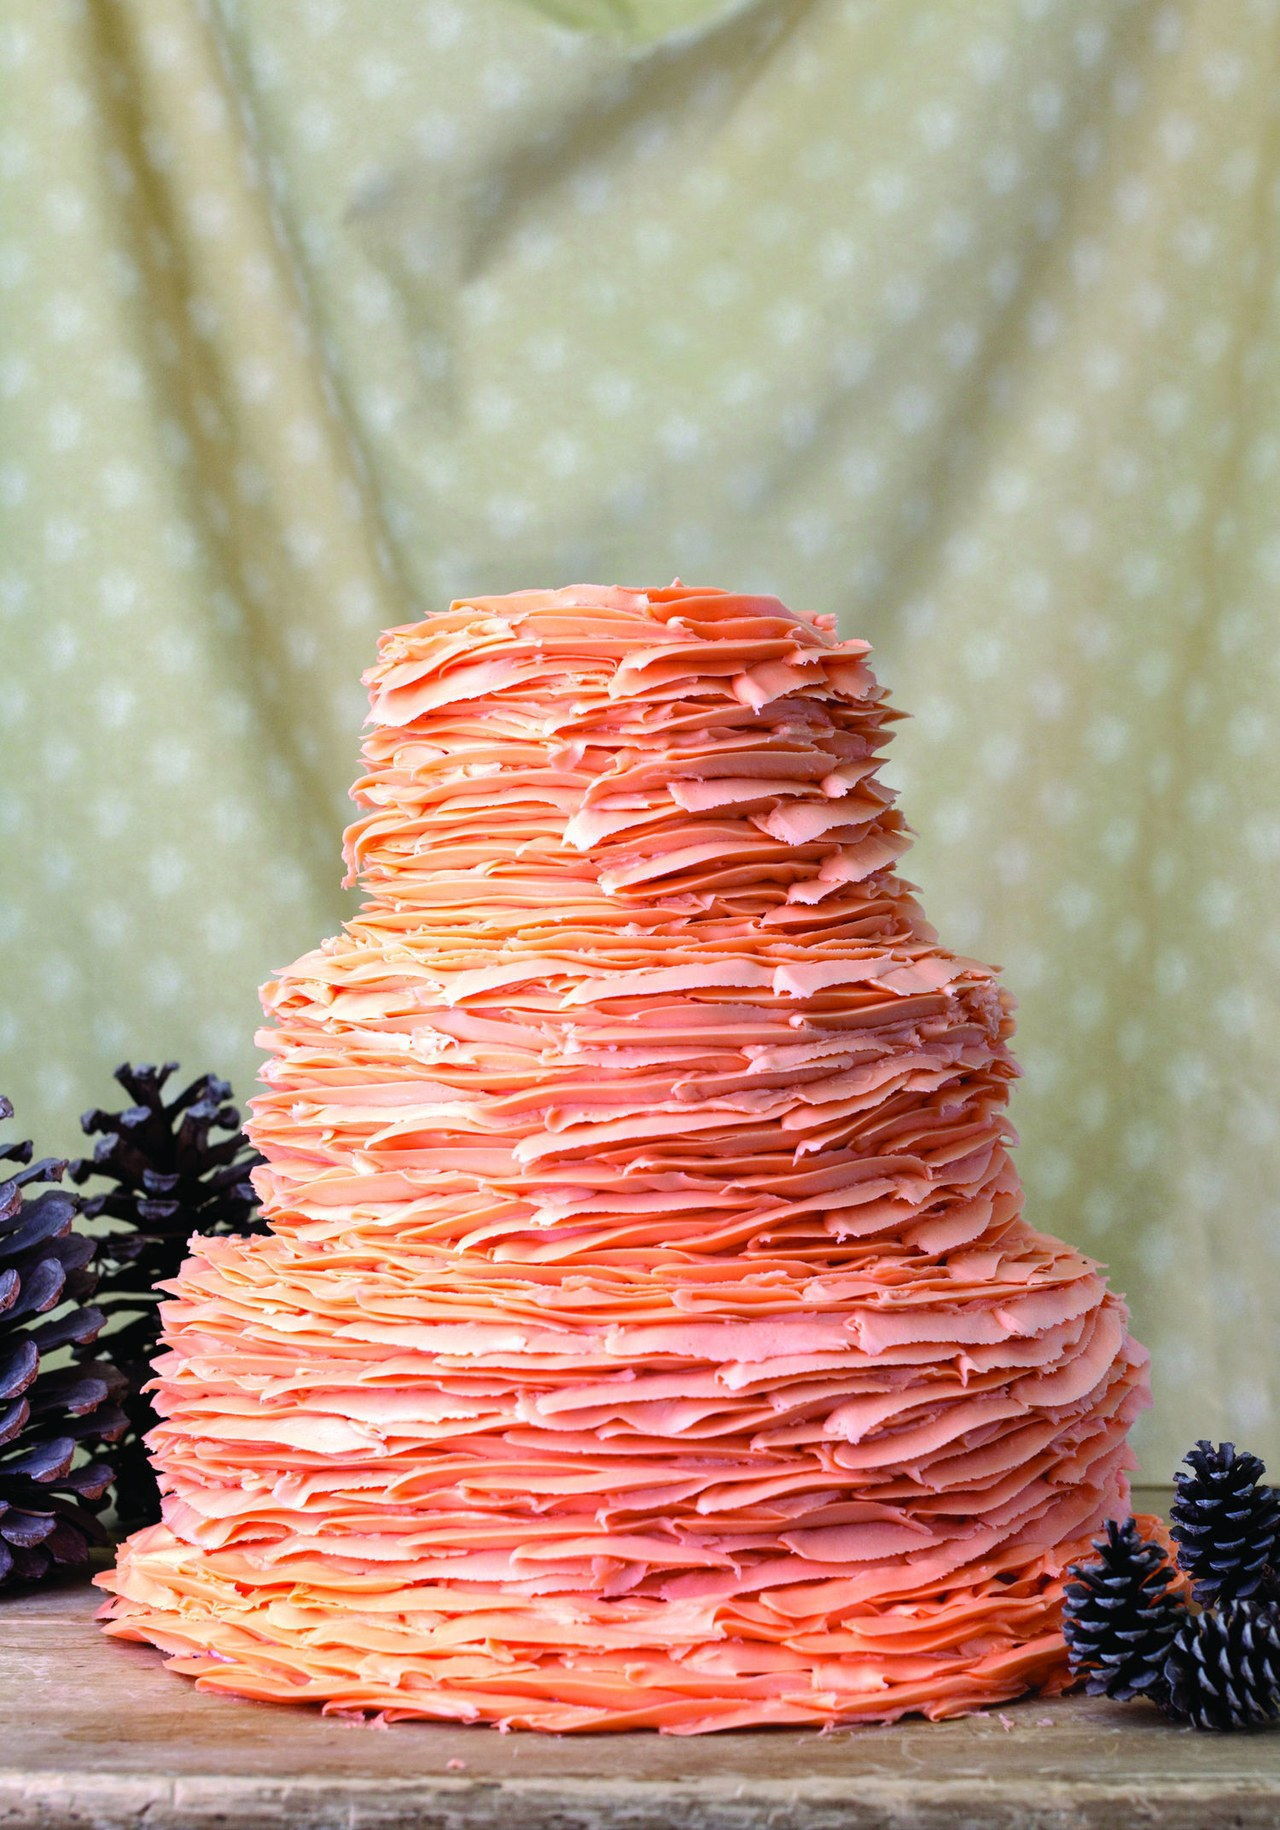 4 pictures of wedding cakes magnolia bakery 0328